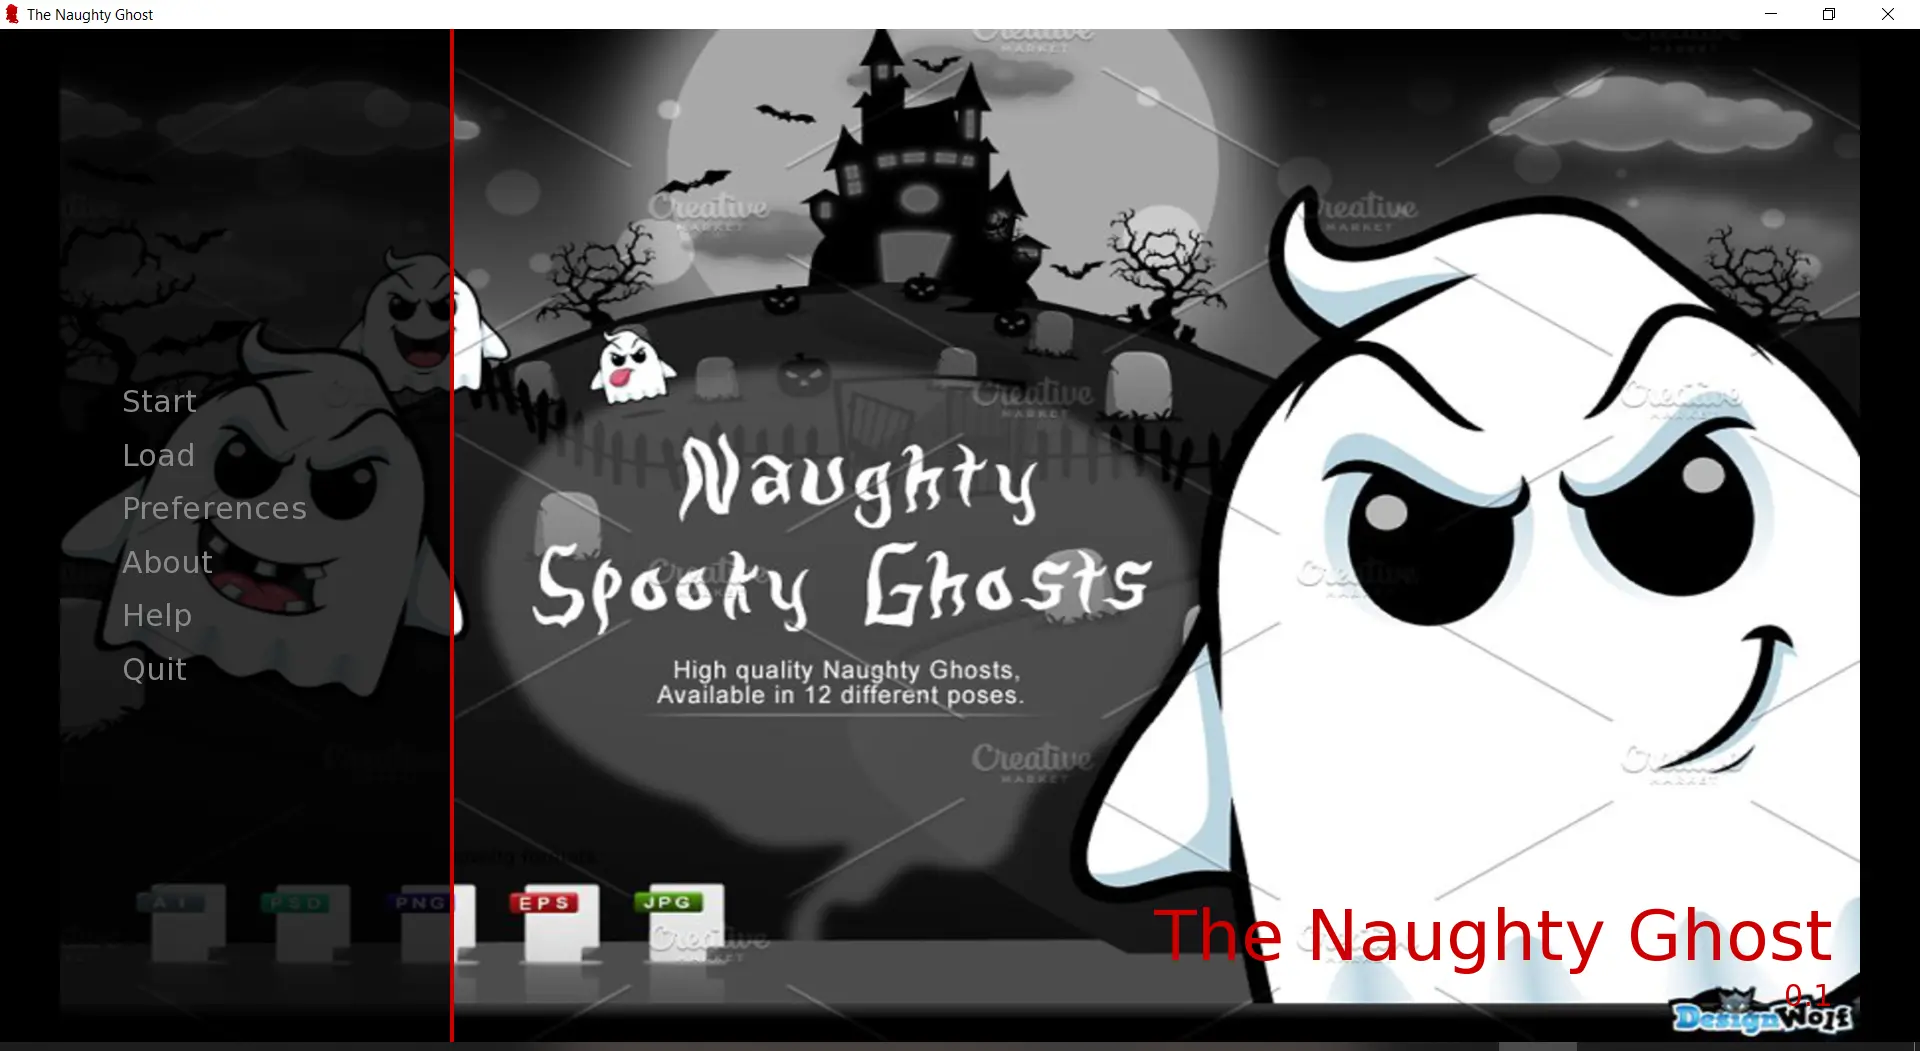 The Naughty Ghost main image